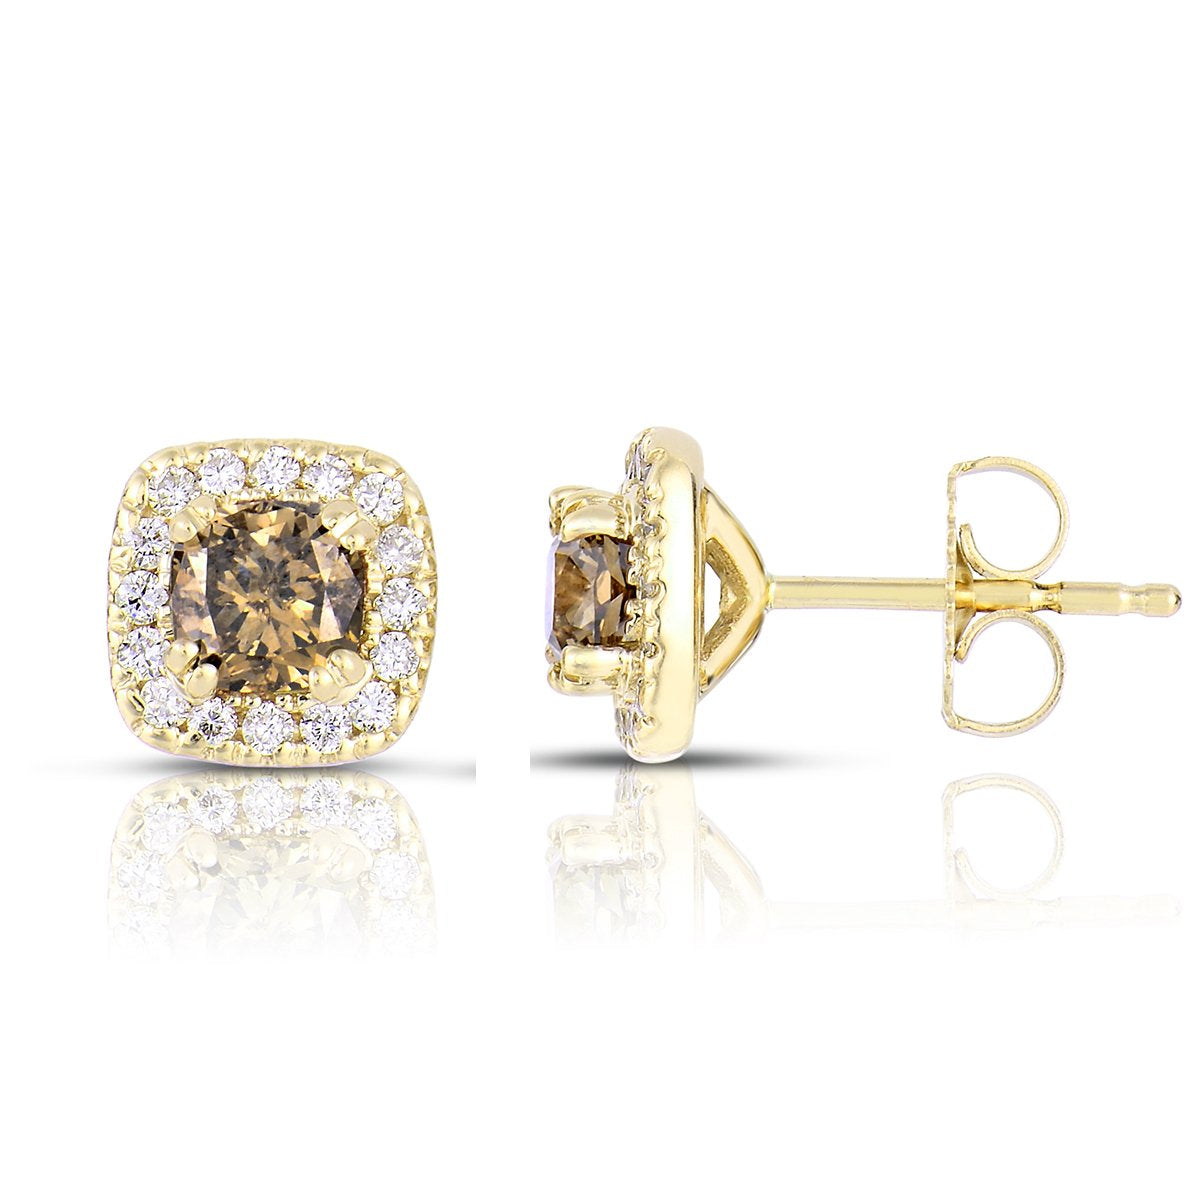 Sabel Collection 14K Yellow Gold Mocha Diamond and White Diamond Square Stud Earrings